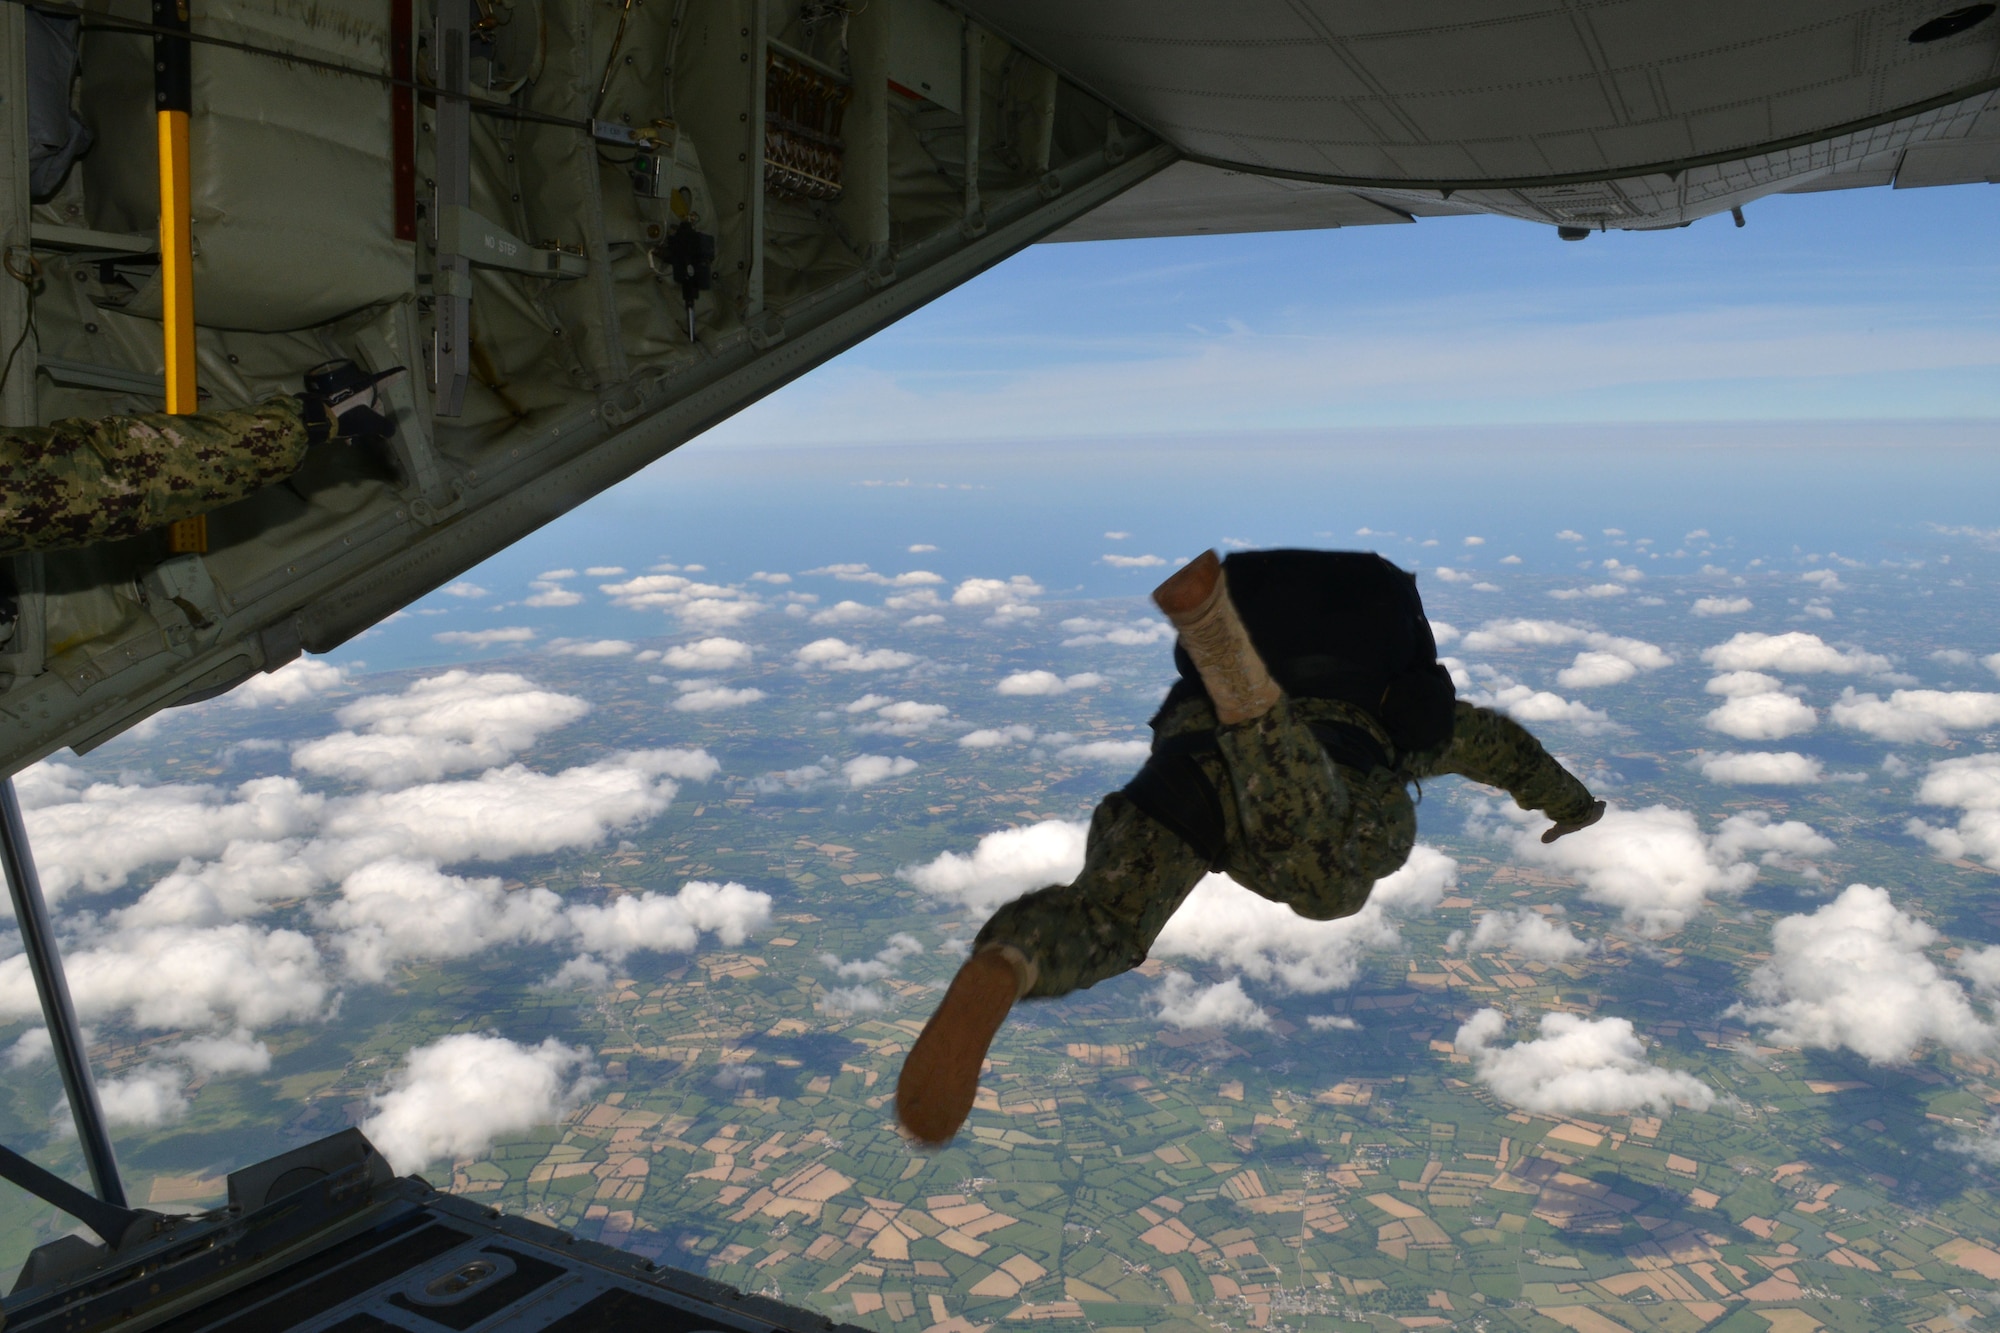 U.S. Special Operations Command -- Europe operator jumps off the ramp of an MC-130J Commando II assigned to the 67th Special Operations Squadron at RAF Mildenhall, England, to perform military free fall to the historic La Fiere drop zone near Sainte Mere Eglise, Normandy, France, June 7, 2015, to commemorate the 71st anniversary of D-Day. More than 60 SOCEUR operators performed the MFF jumps which were a small portion of the commemorative events which took place in strategic World War II sites throughout Normandy. (U.S. Air Force photo by Tech. Sgt. Stacia Zachary)